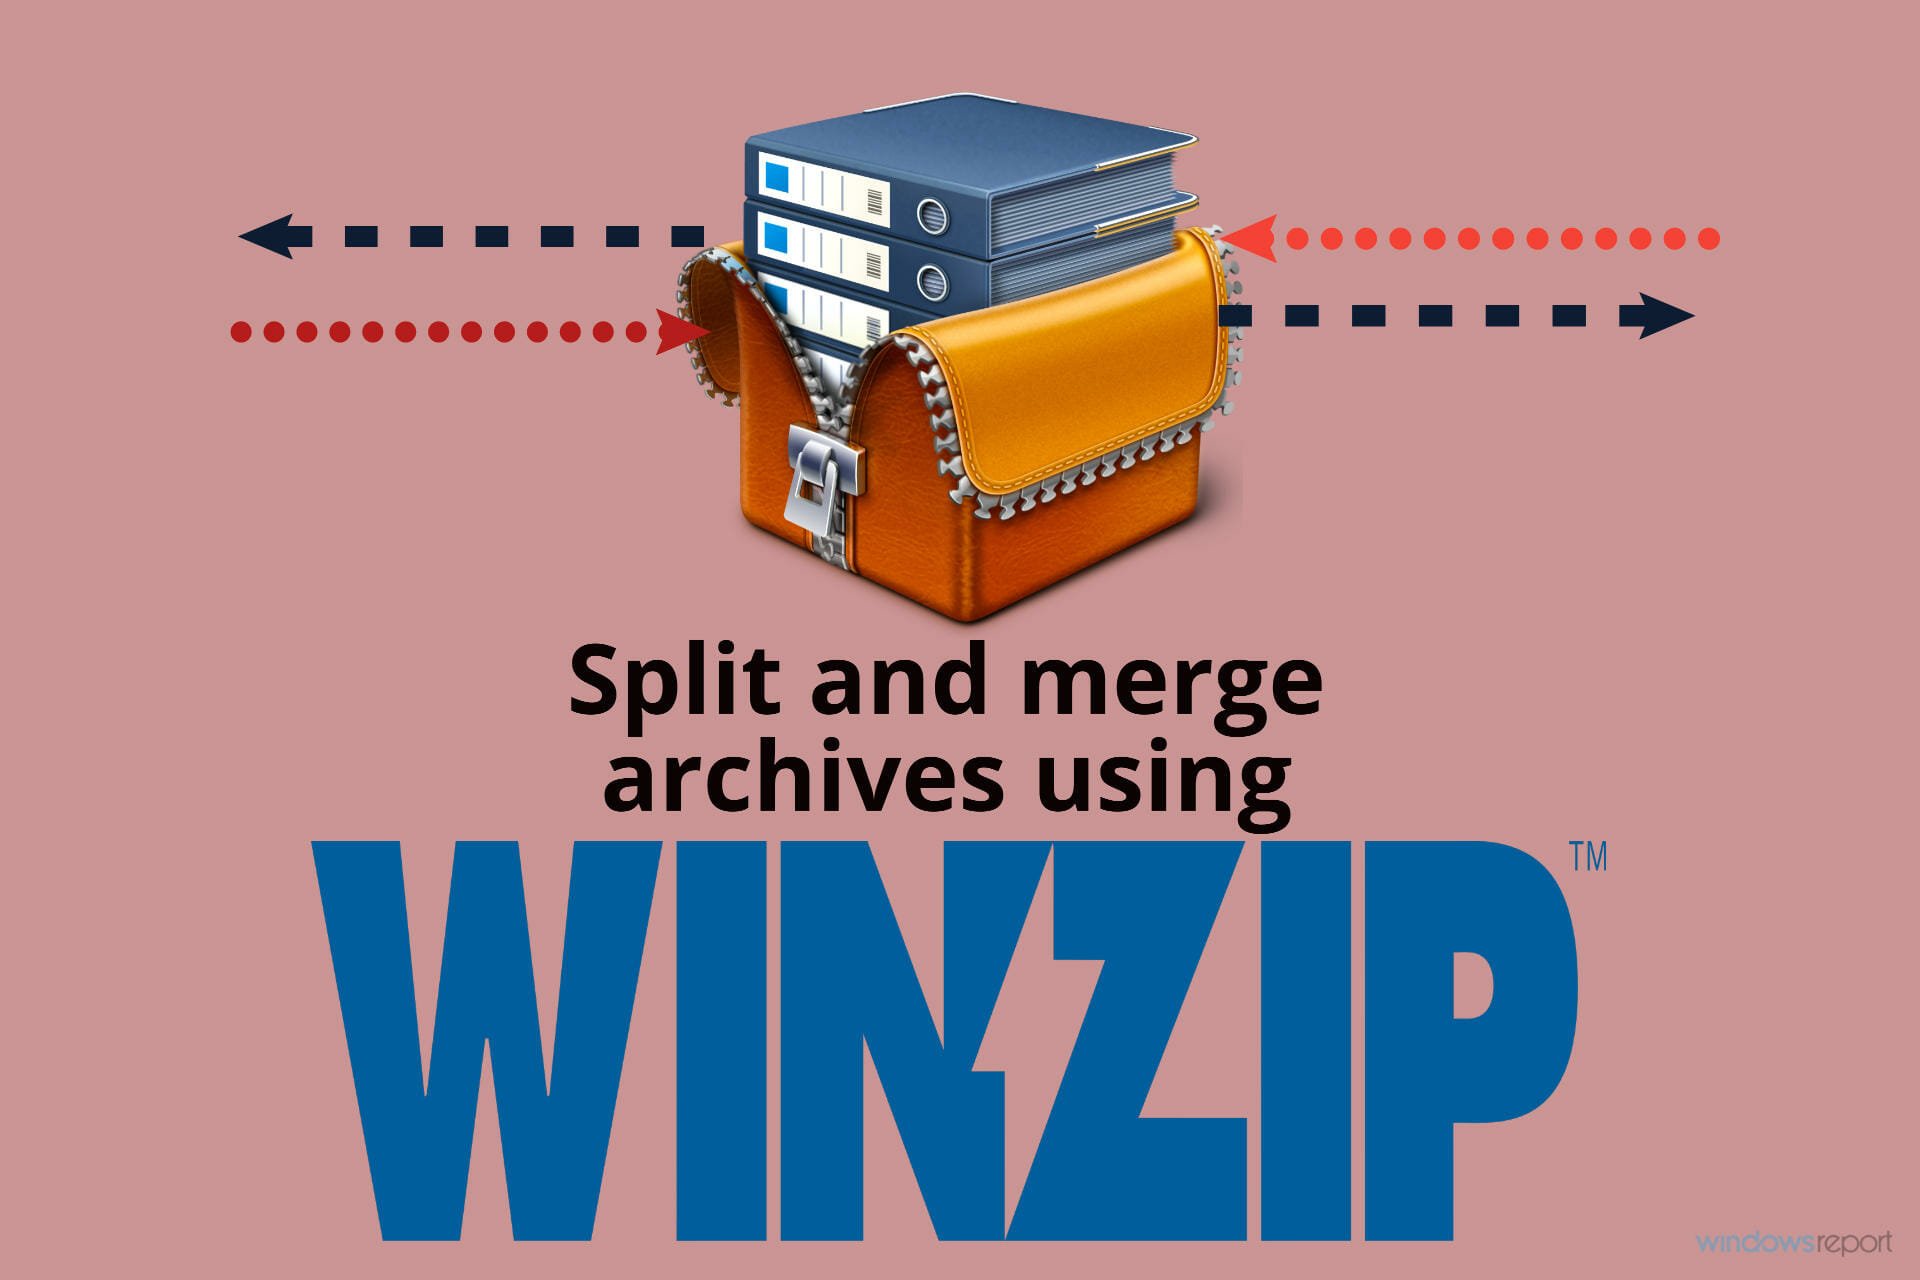 How can I I merge and split files by using WinZip